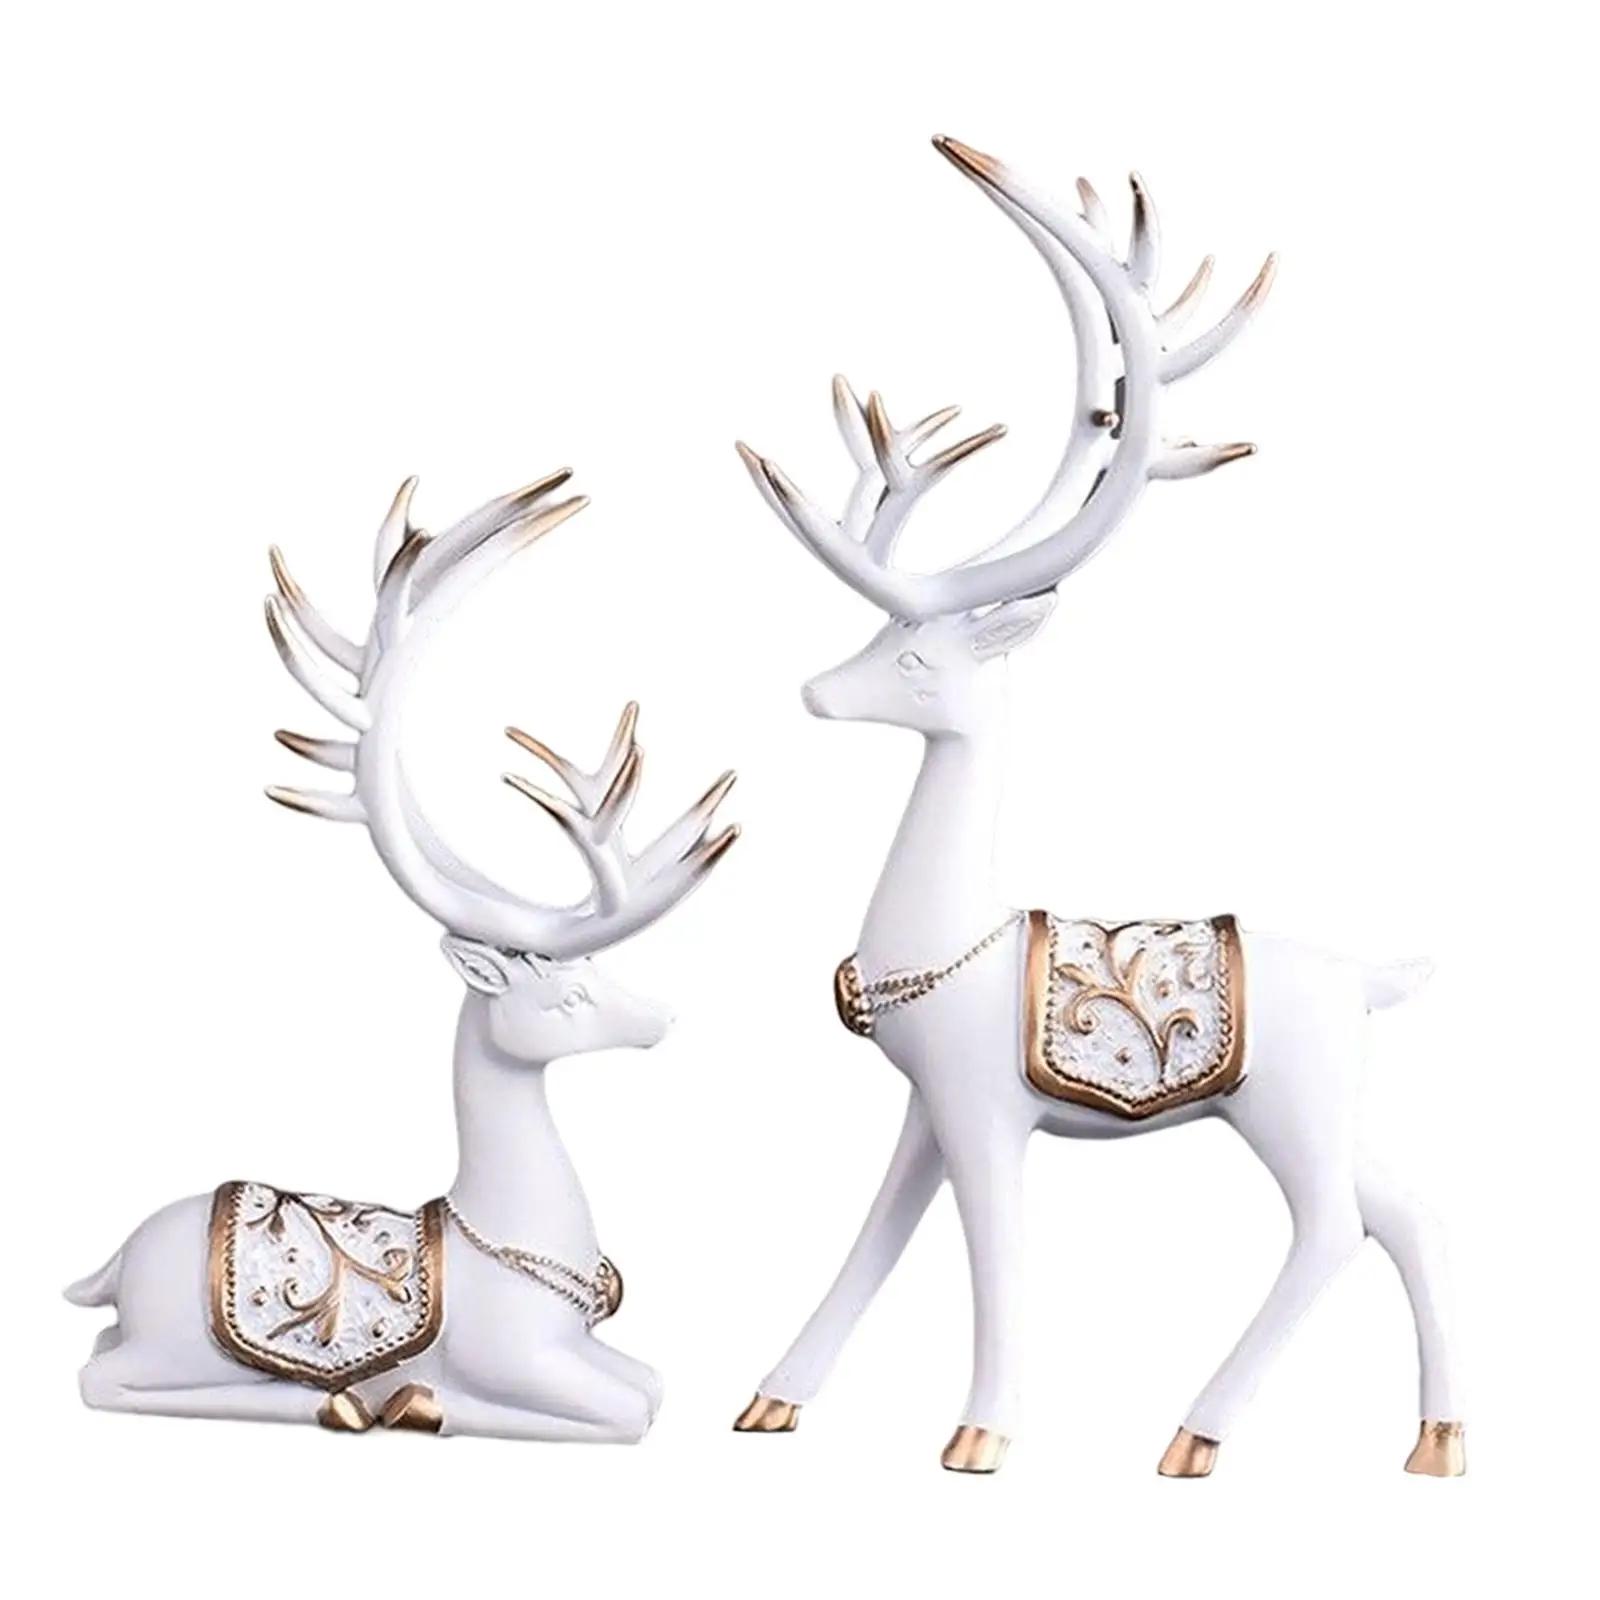 Reindeer Statue Art Figurine Collection Resin Ornament Creative Animal Sculpture for Party Tabletop Dining Room Bookshelf Gift